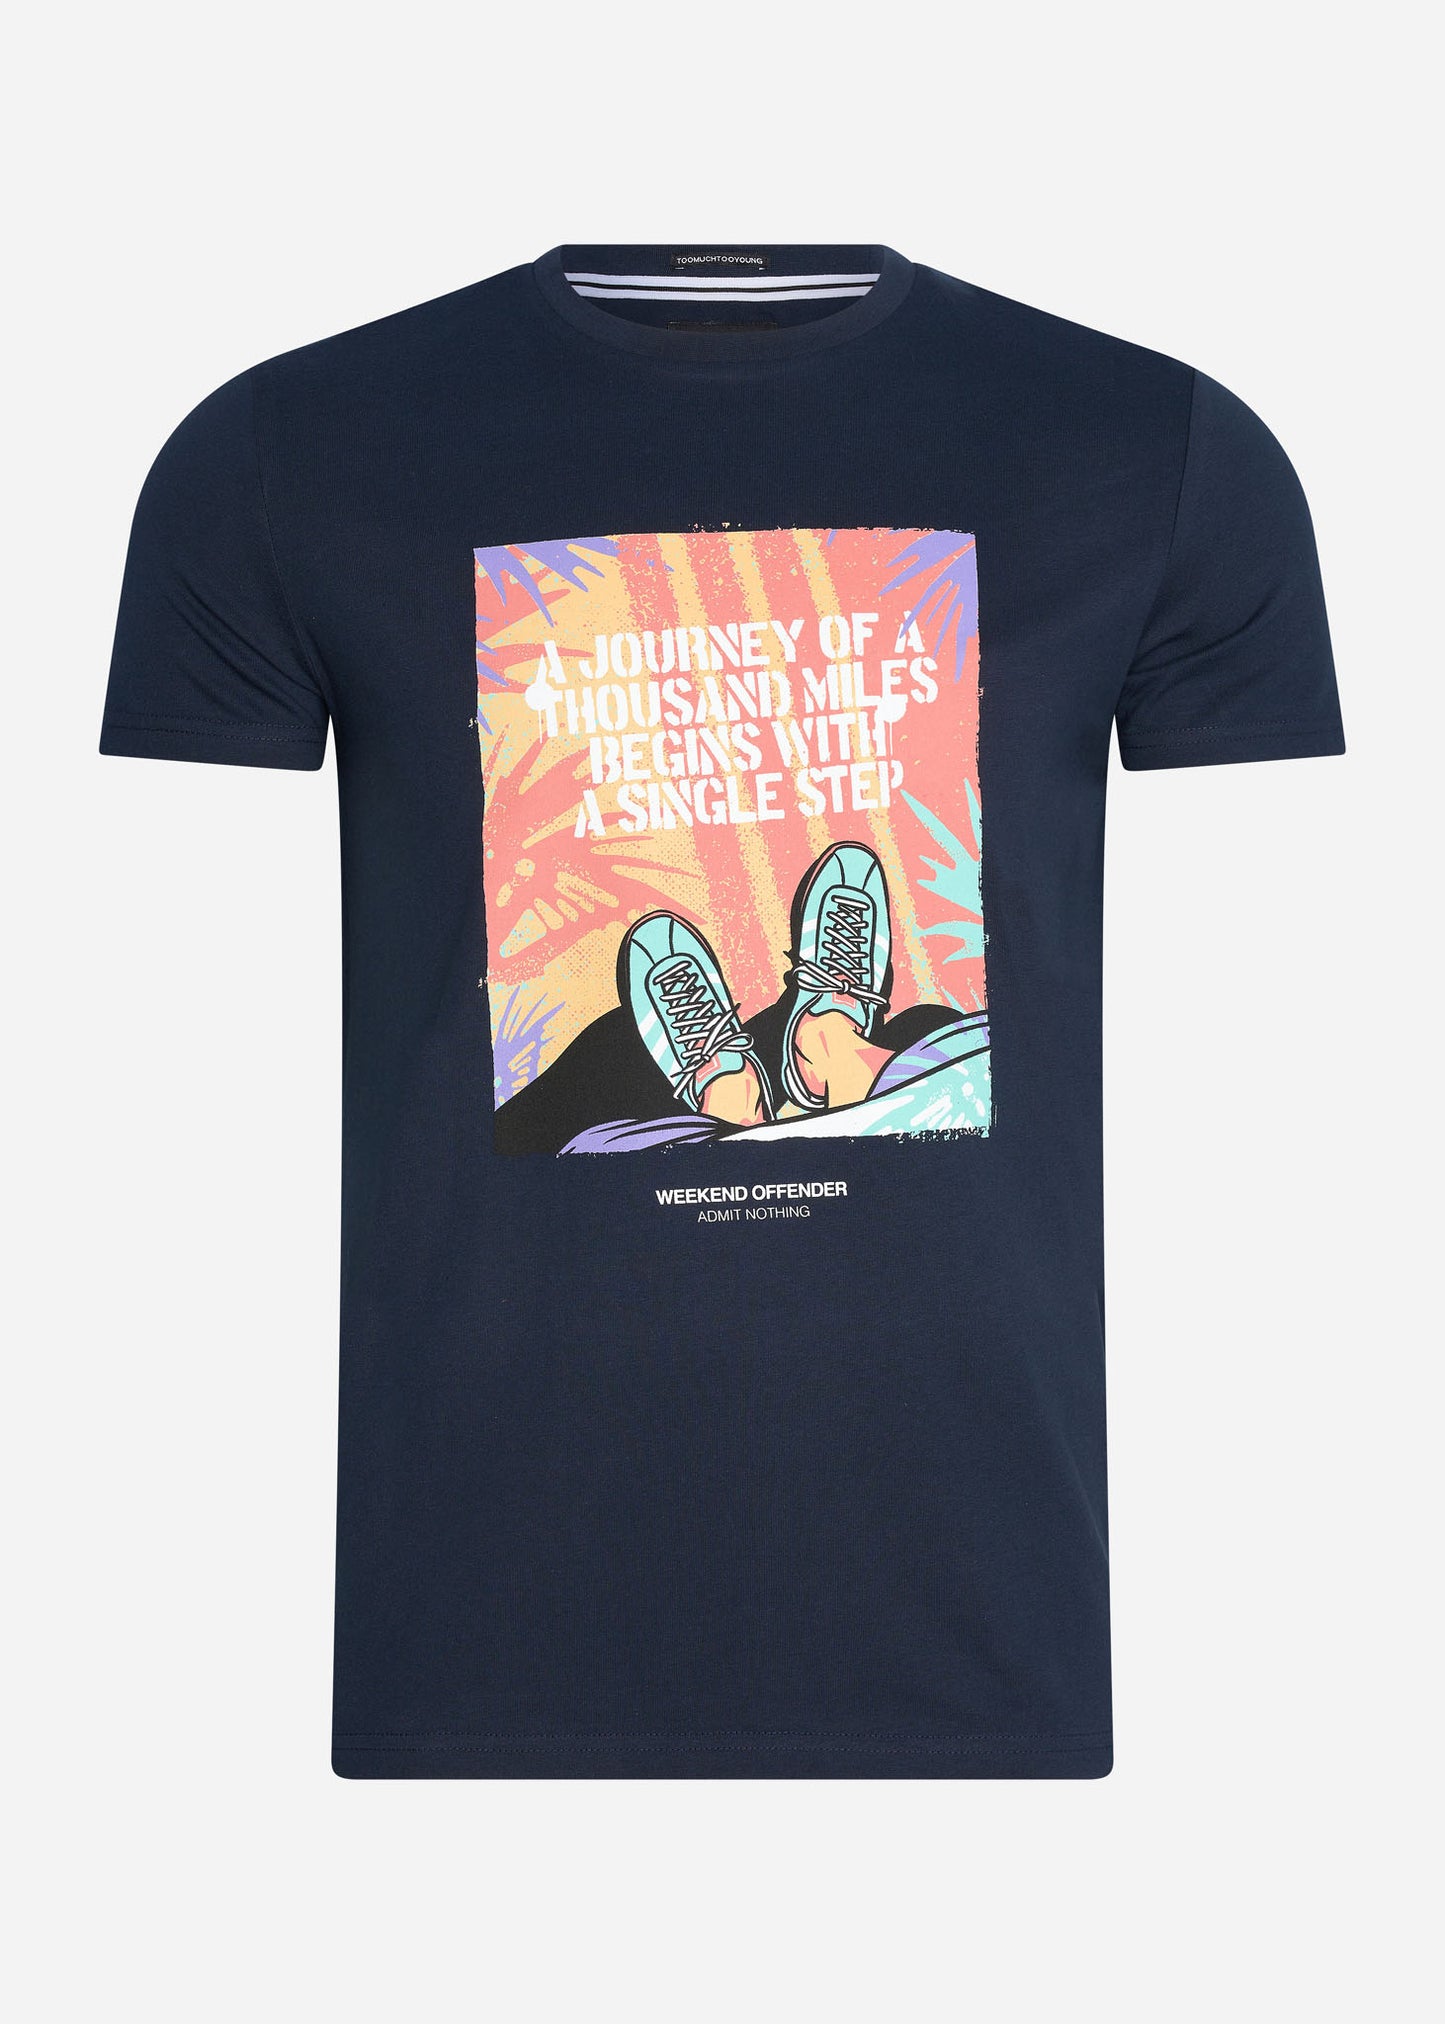 Weekend Offender t-shirt navy with print